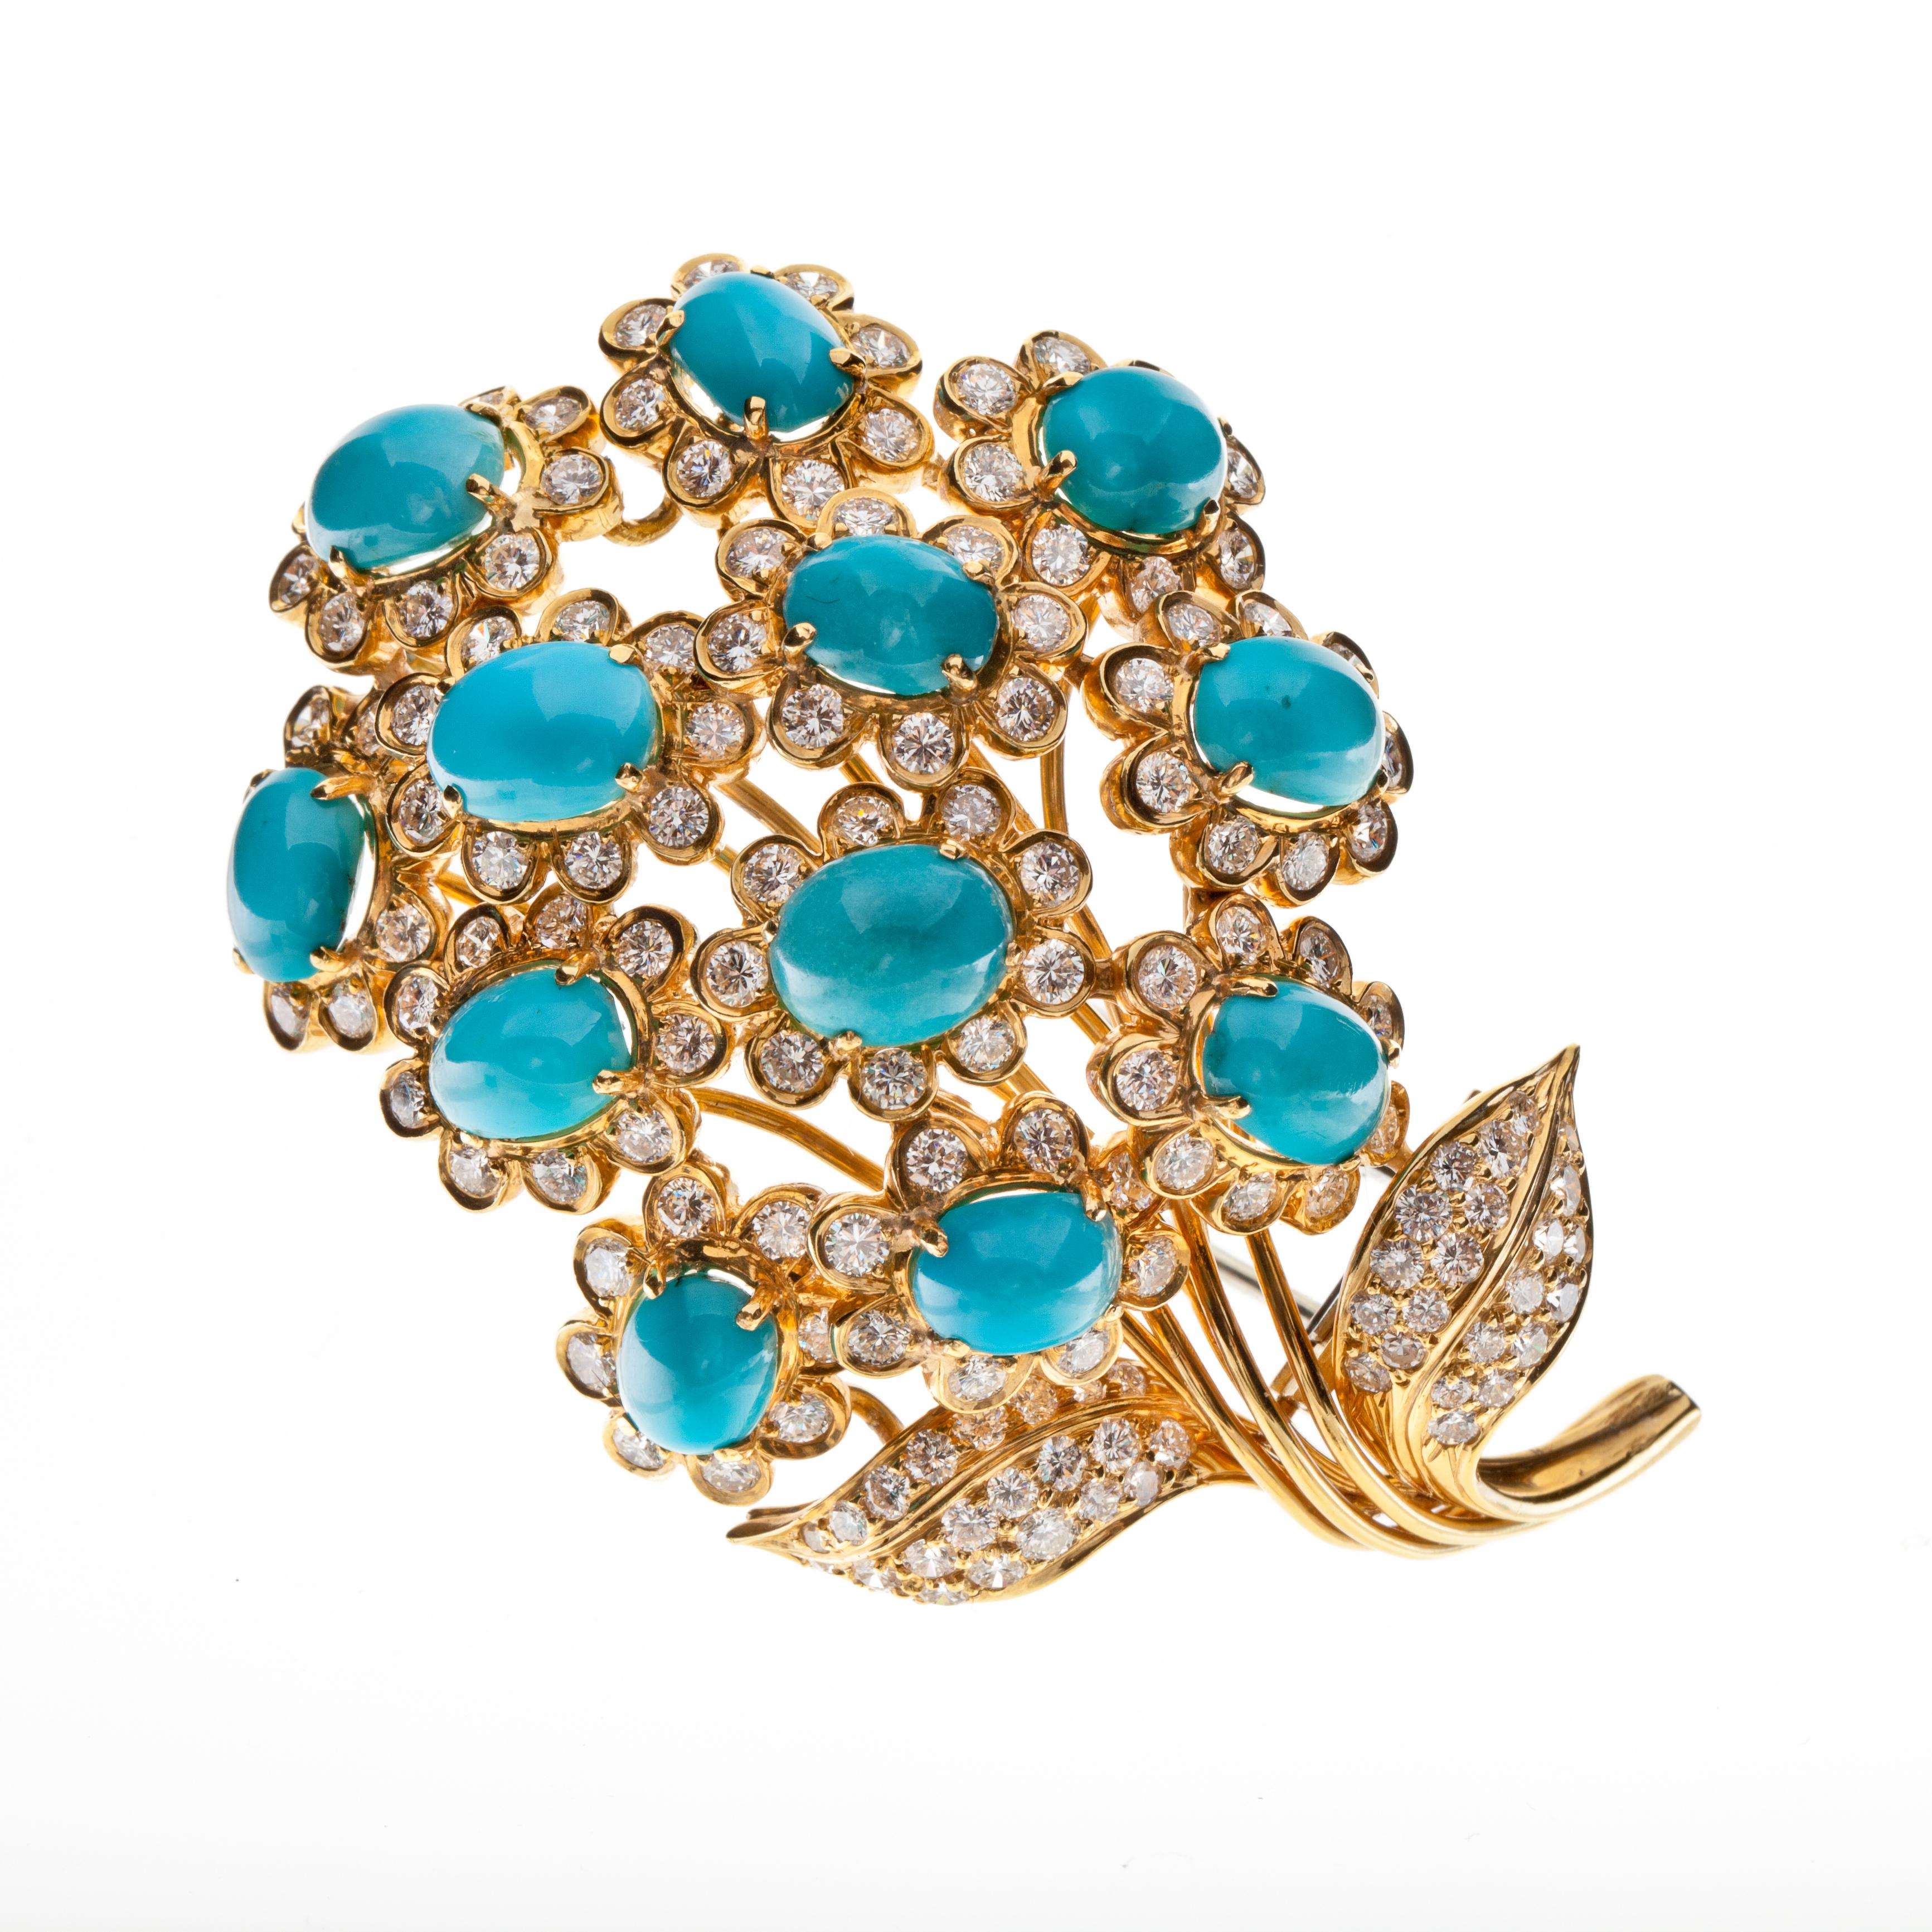 David Webb floral brooch composed of 18K yellow gold featuring turquoise and diamonds.  There is approximately 16 carats of turquoise and 4.80 carats of round brilliant-cut diamonds, E-G color and VVS-VS clarity.